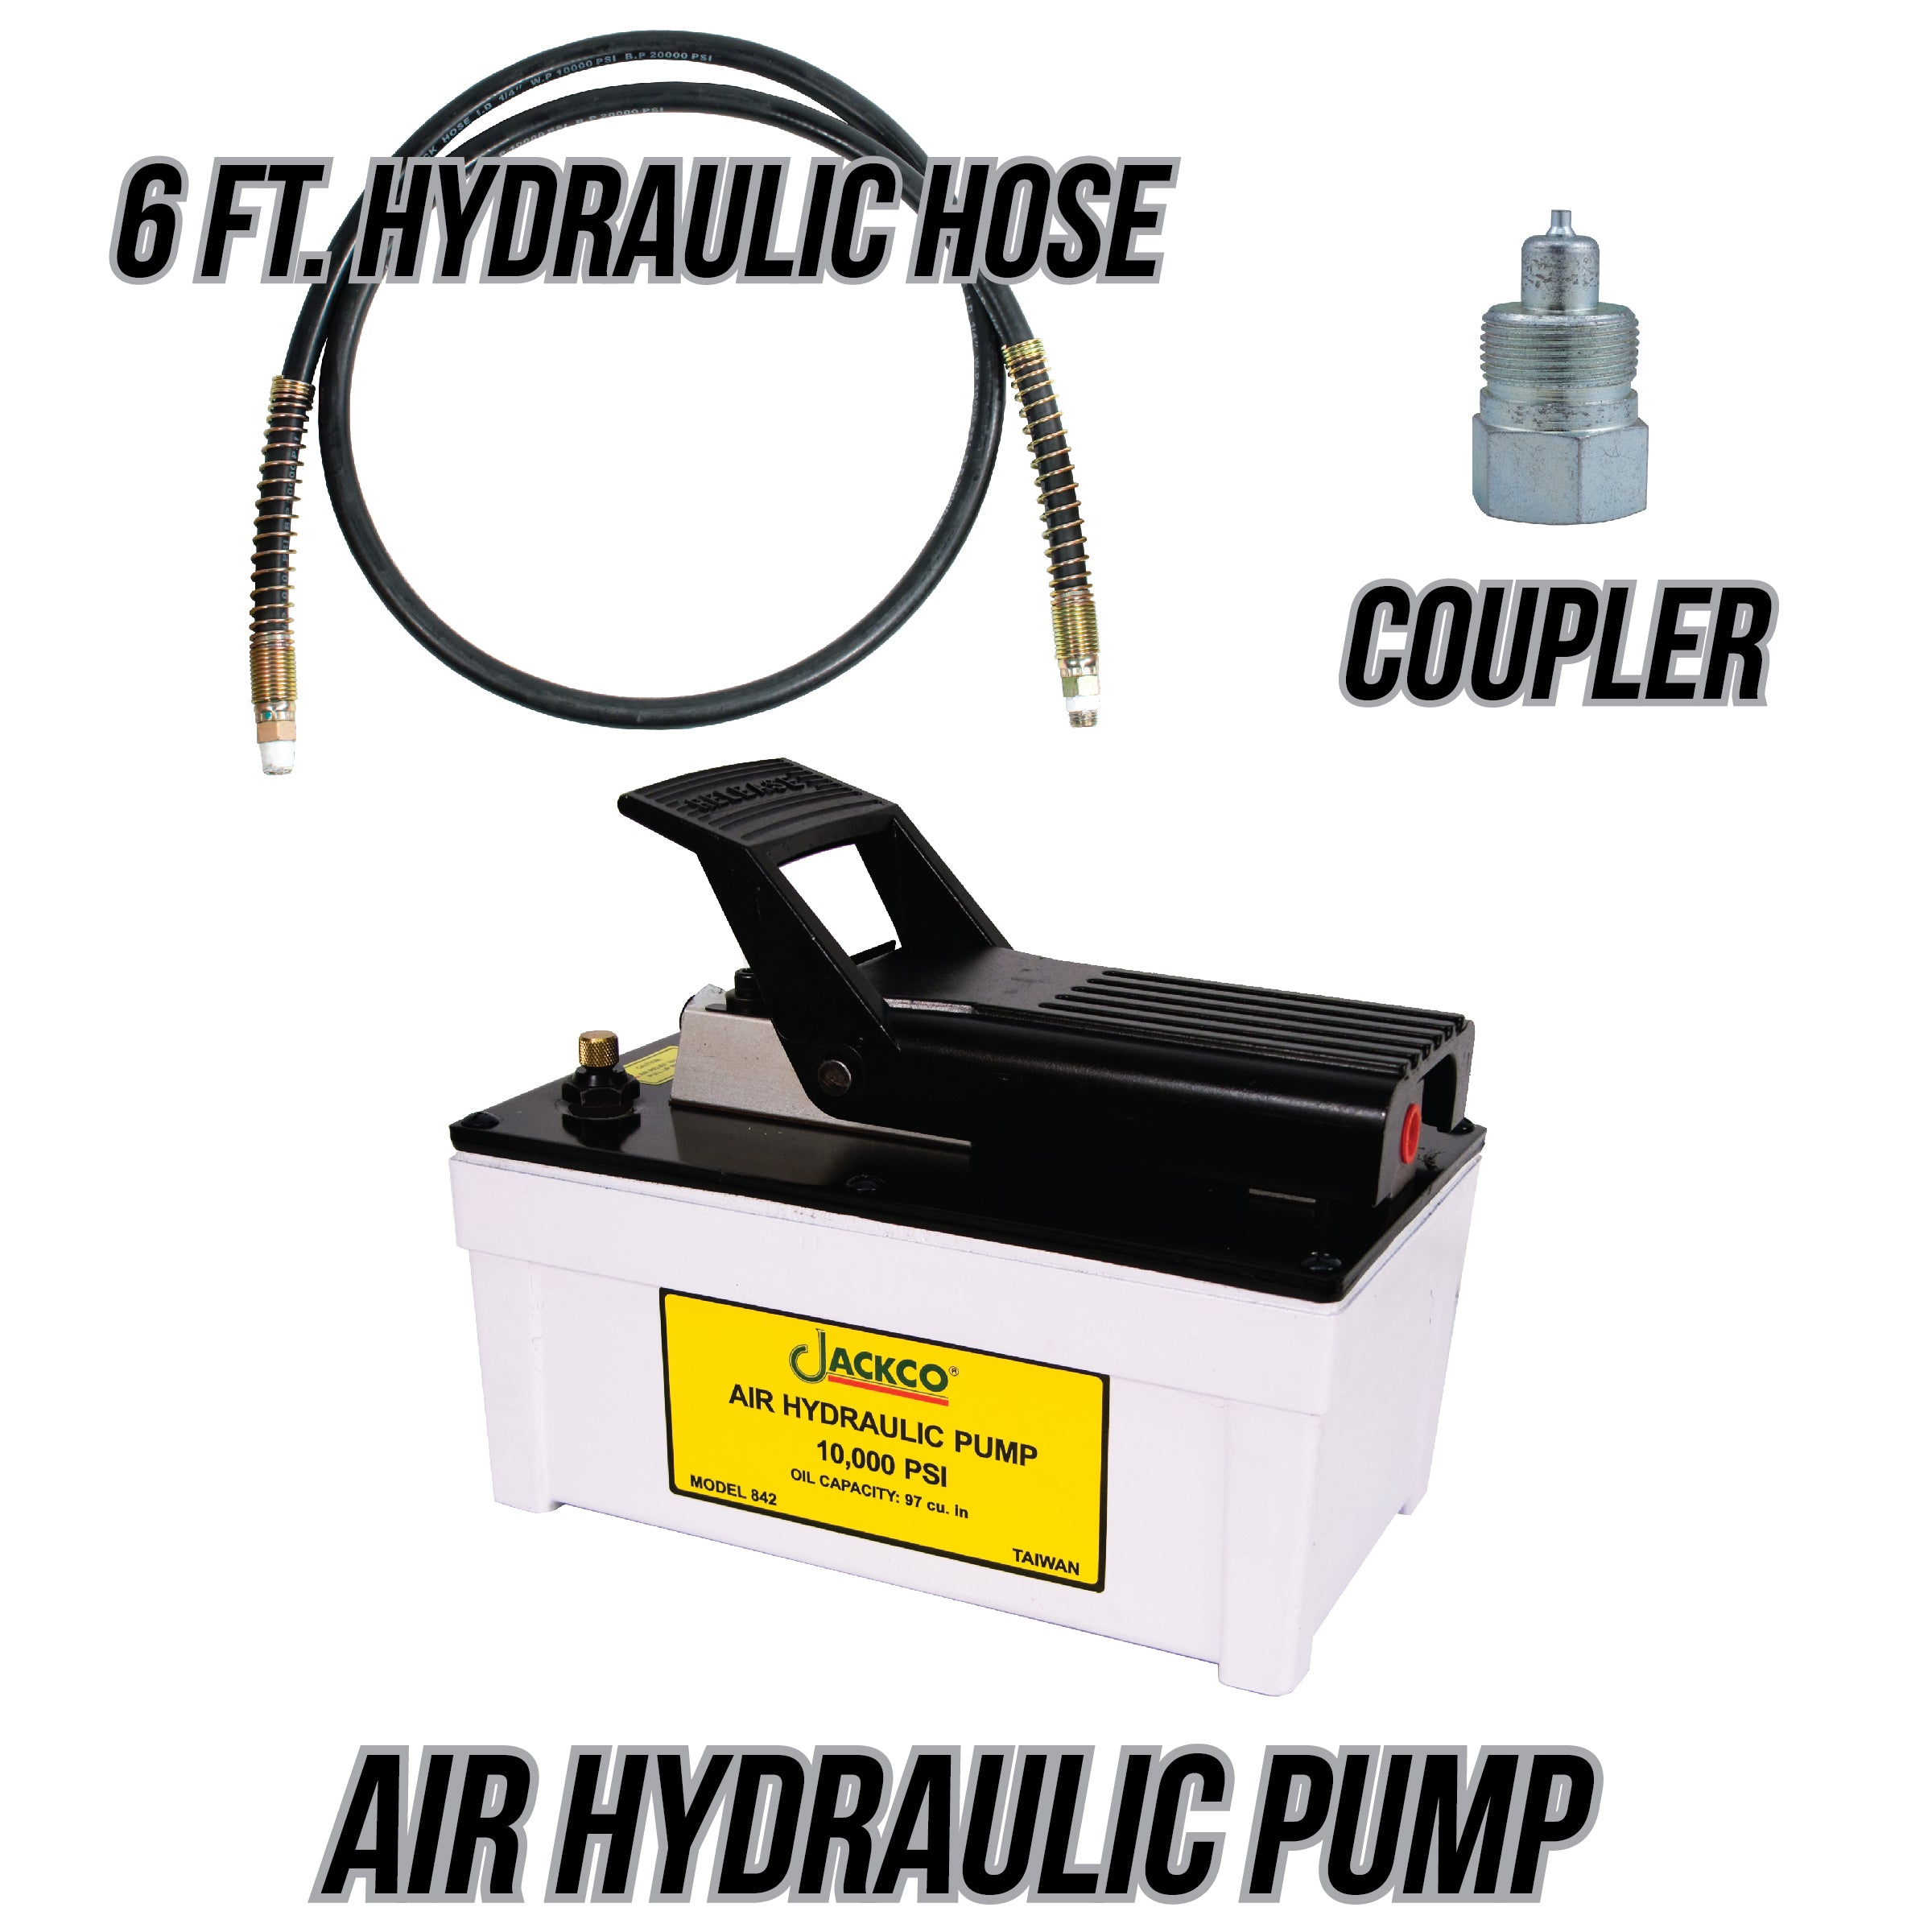 Jackco Air Hydraulic Pump with 6 ft. 10,000 psi Hydraulic Hose and Coupler